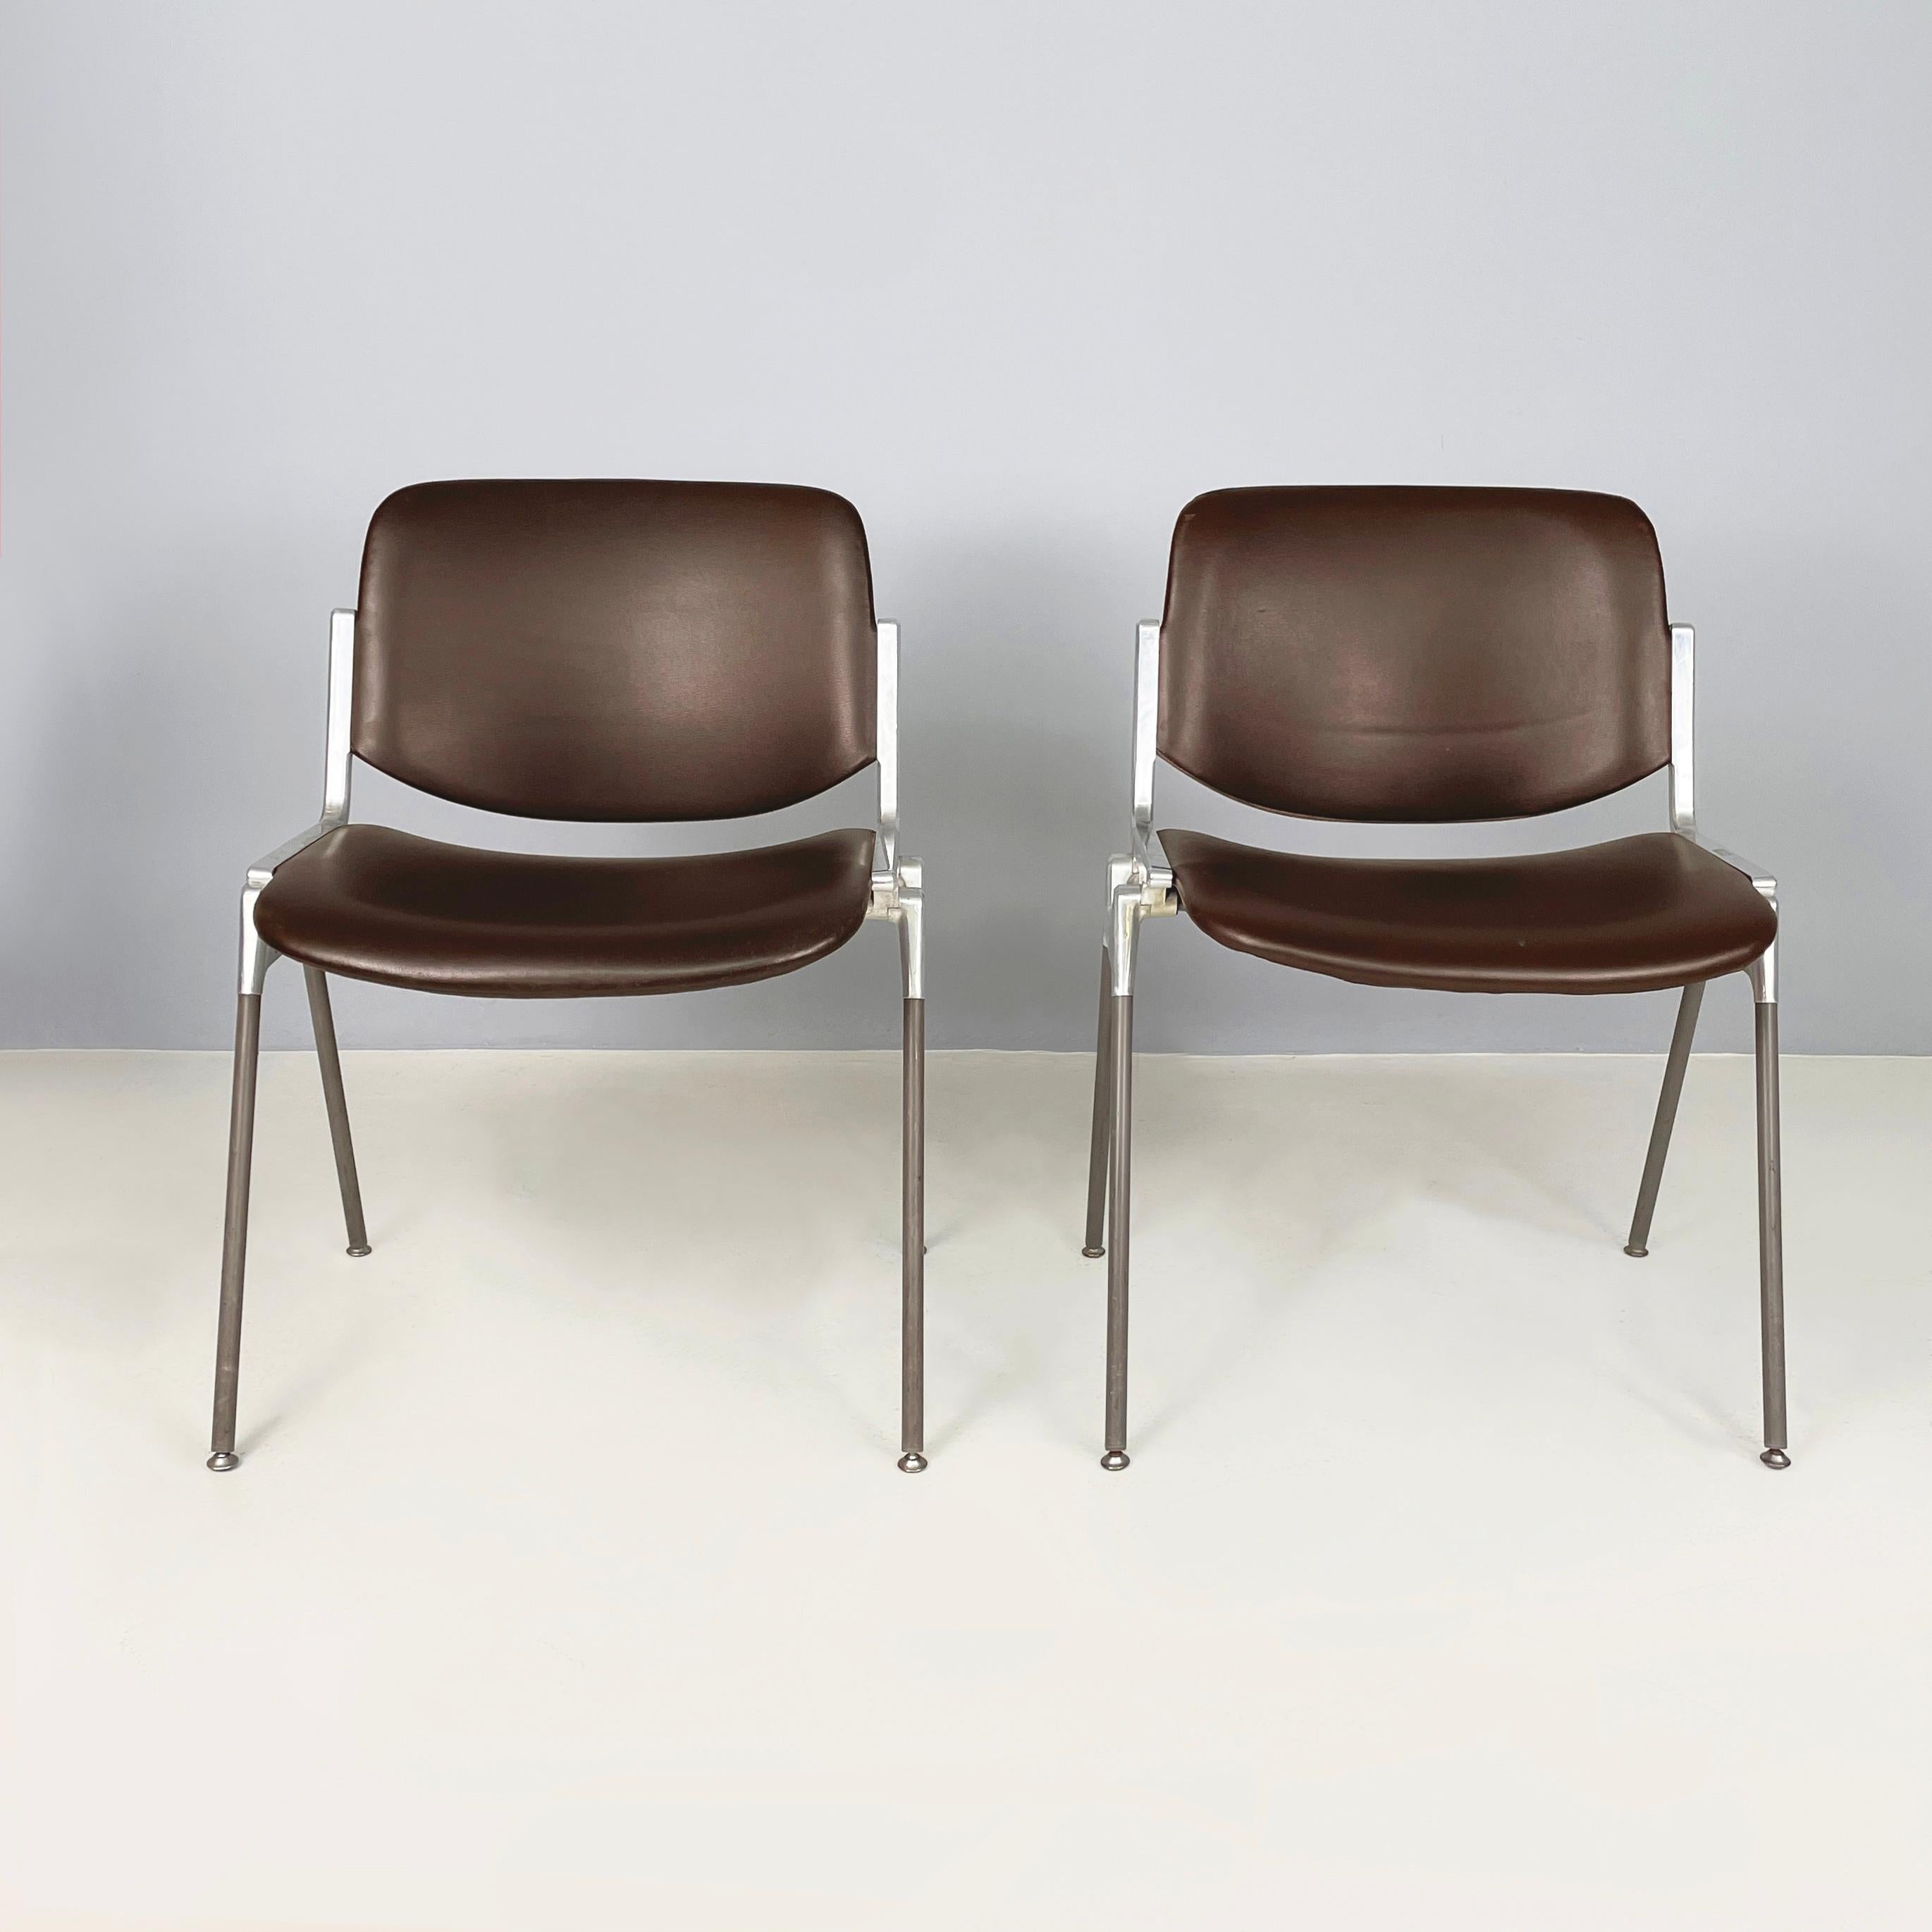 Italian modern Chairs DSC by Giancarlo Piretti for Anonima Castelli, 1970s
Pair of iconic chairs mod. DSC padded and covered in dark brown leather. The seat and backrest are rectangular with rounded corners. The sturdy structure is made of